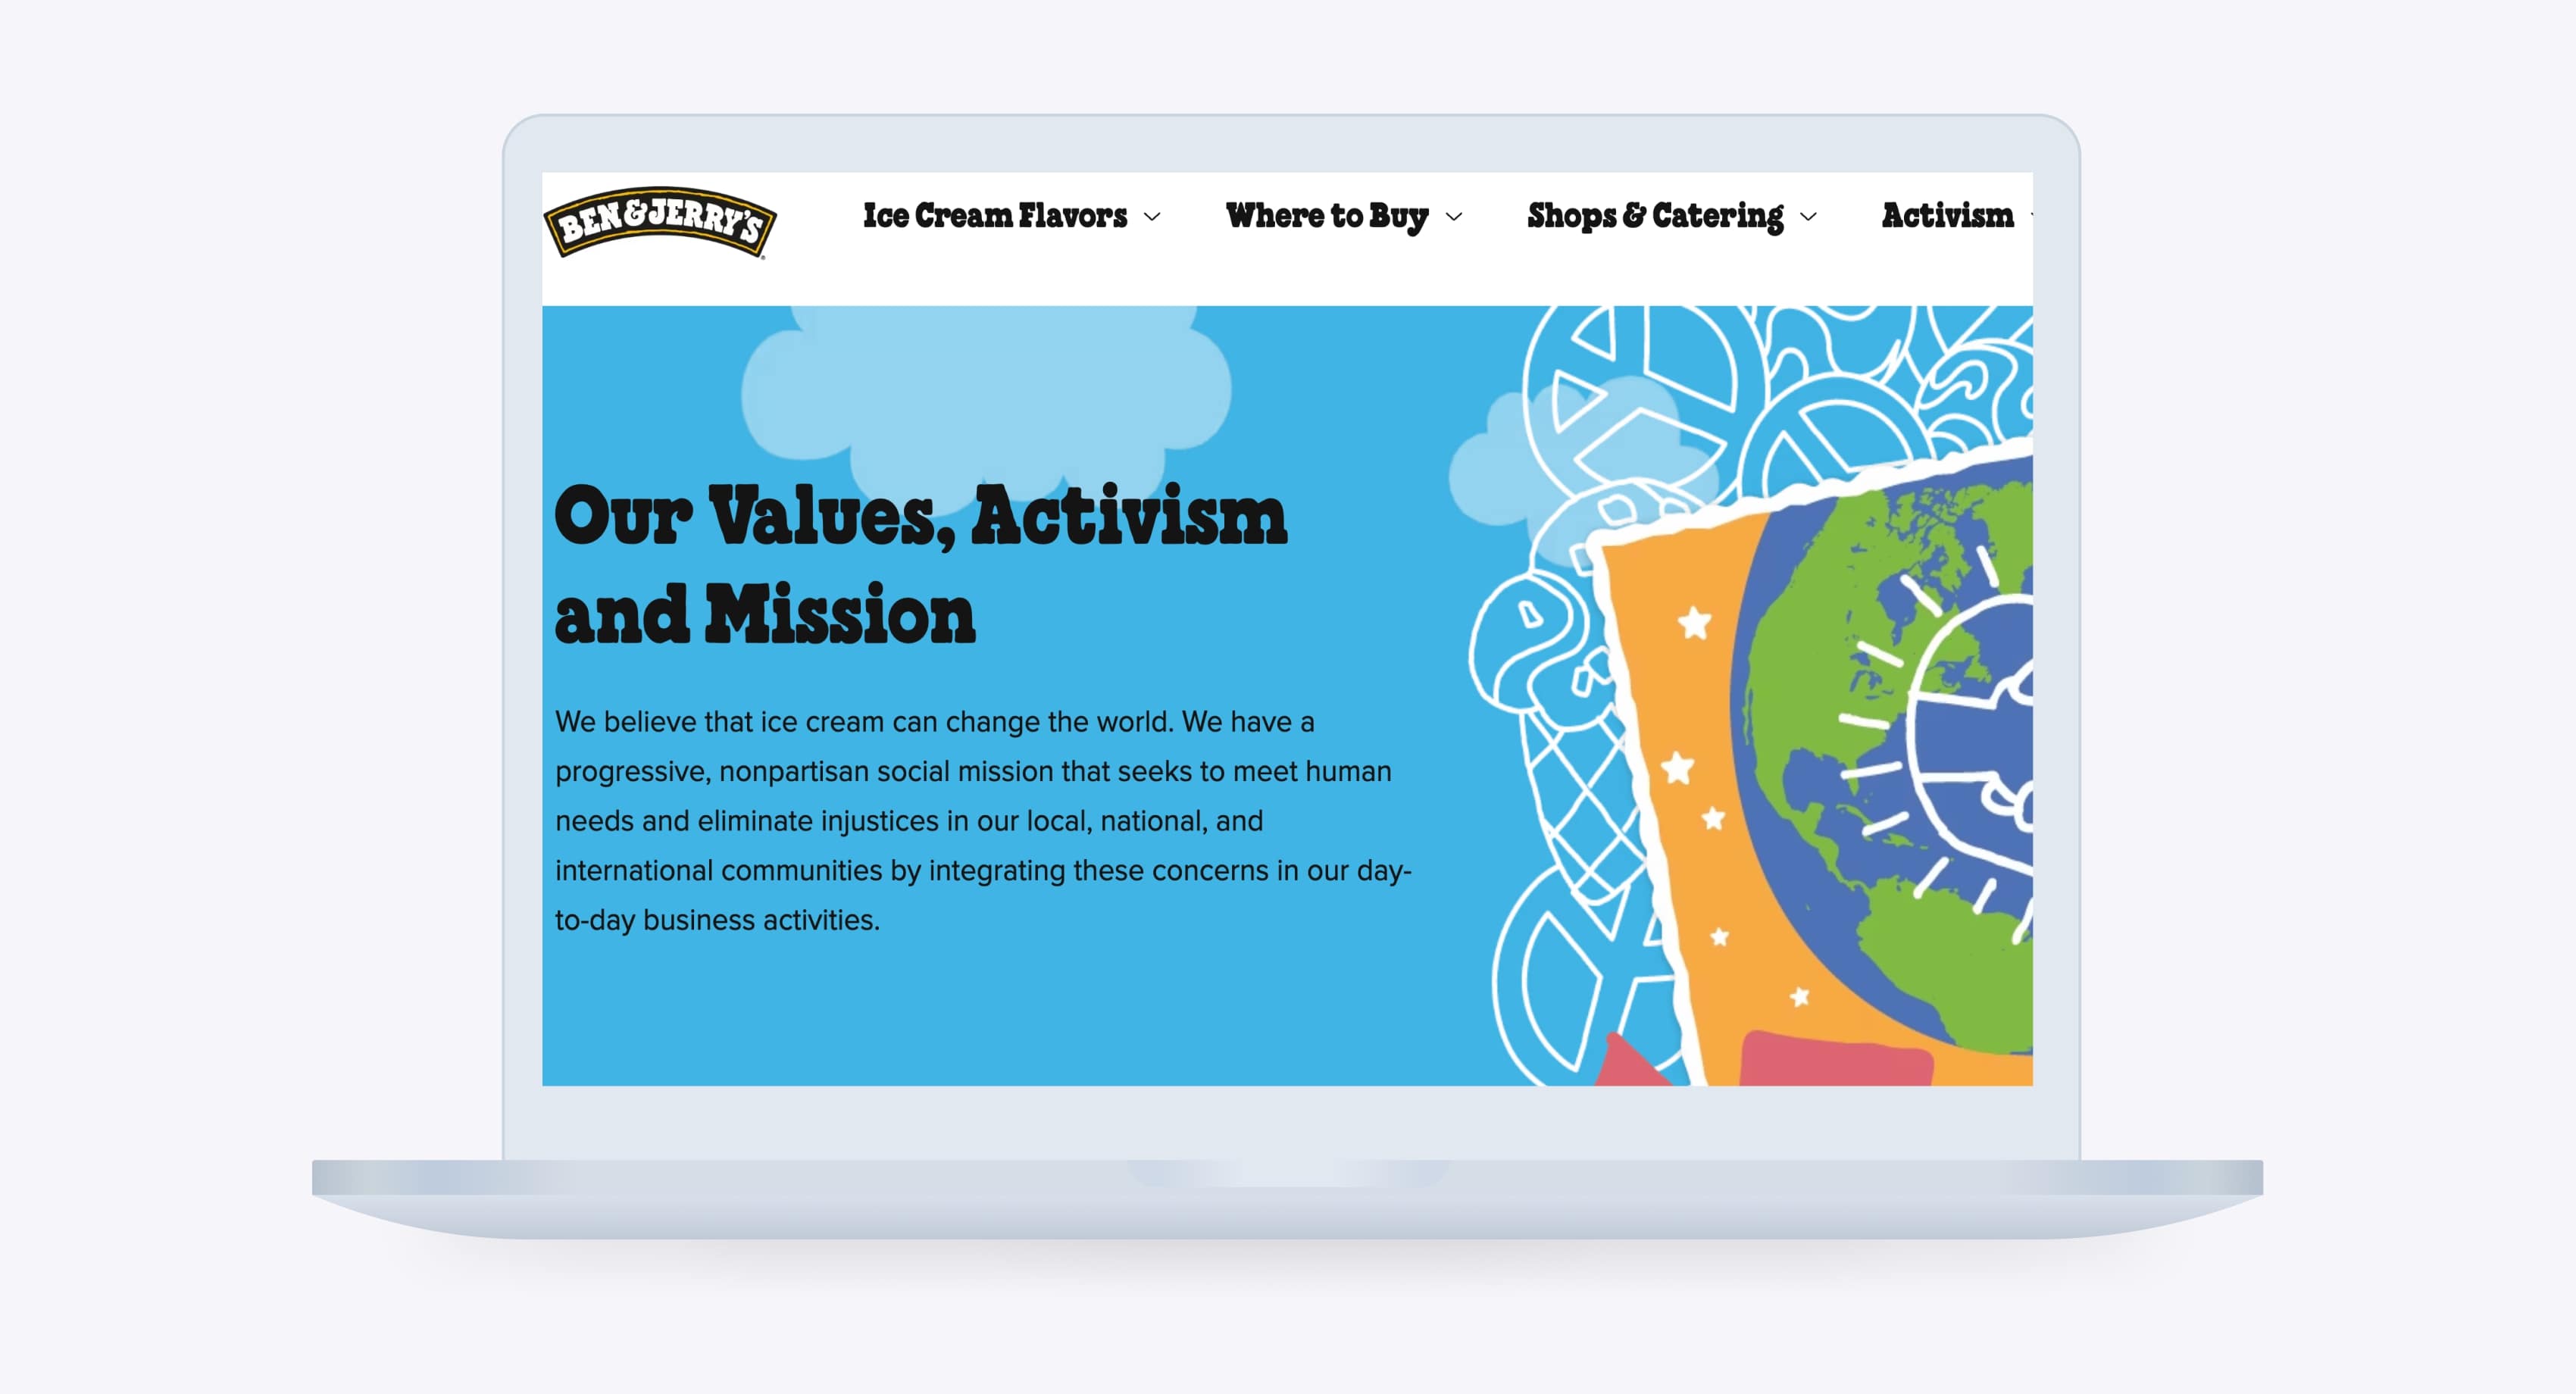 Ben & Jerry's values, activism and mission